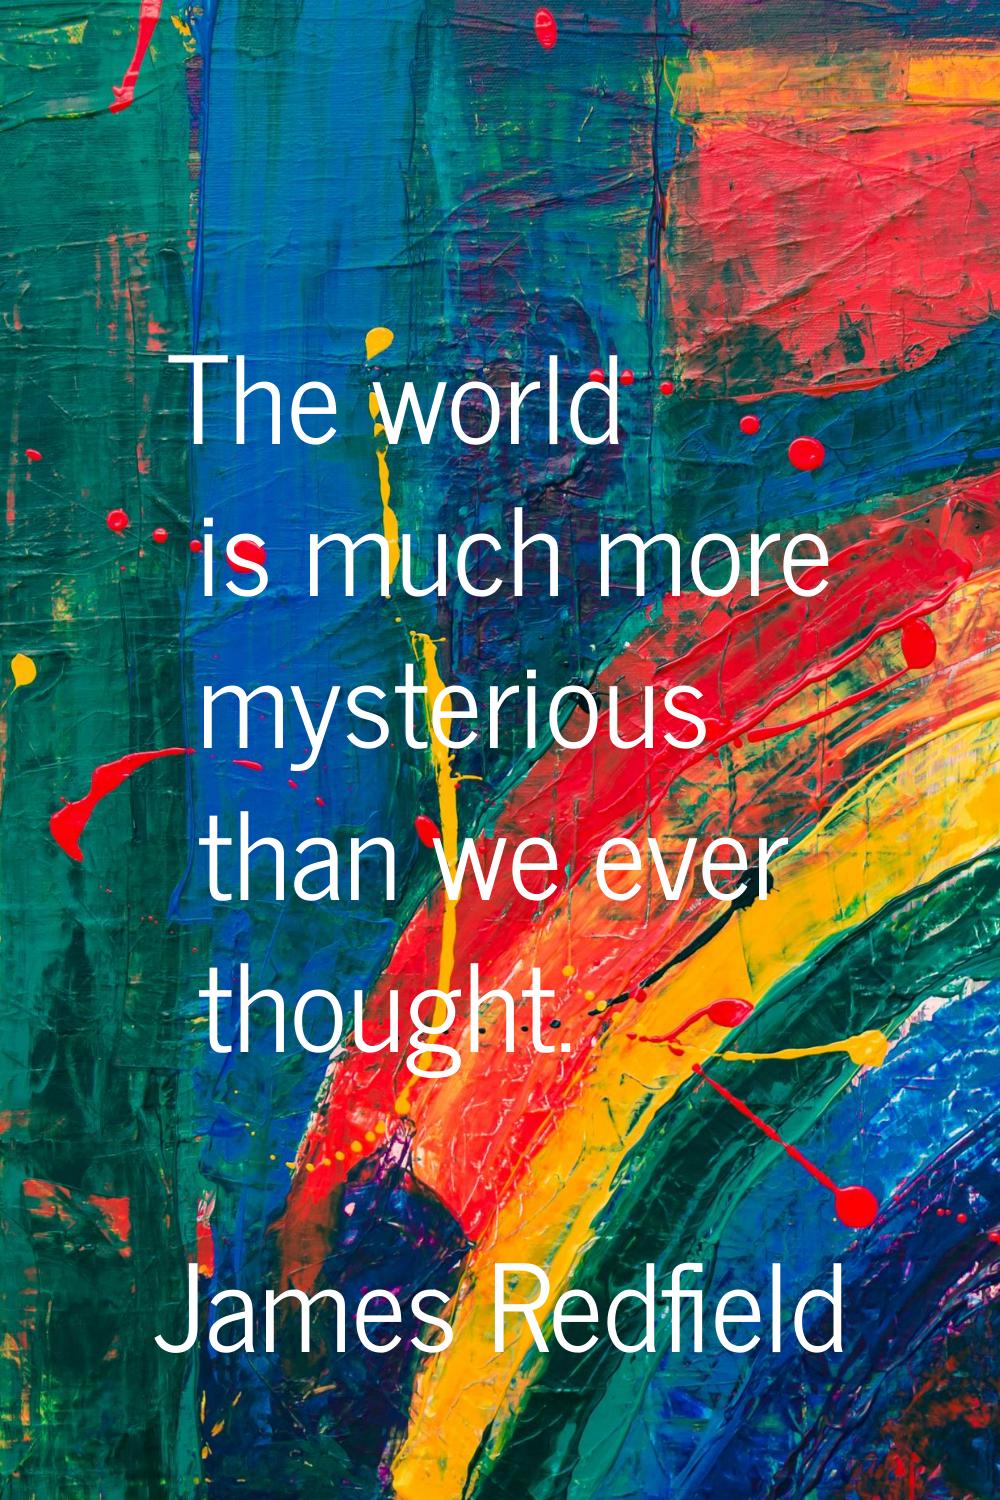 The world is much more mysterious than we ever thought.